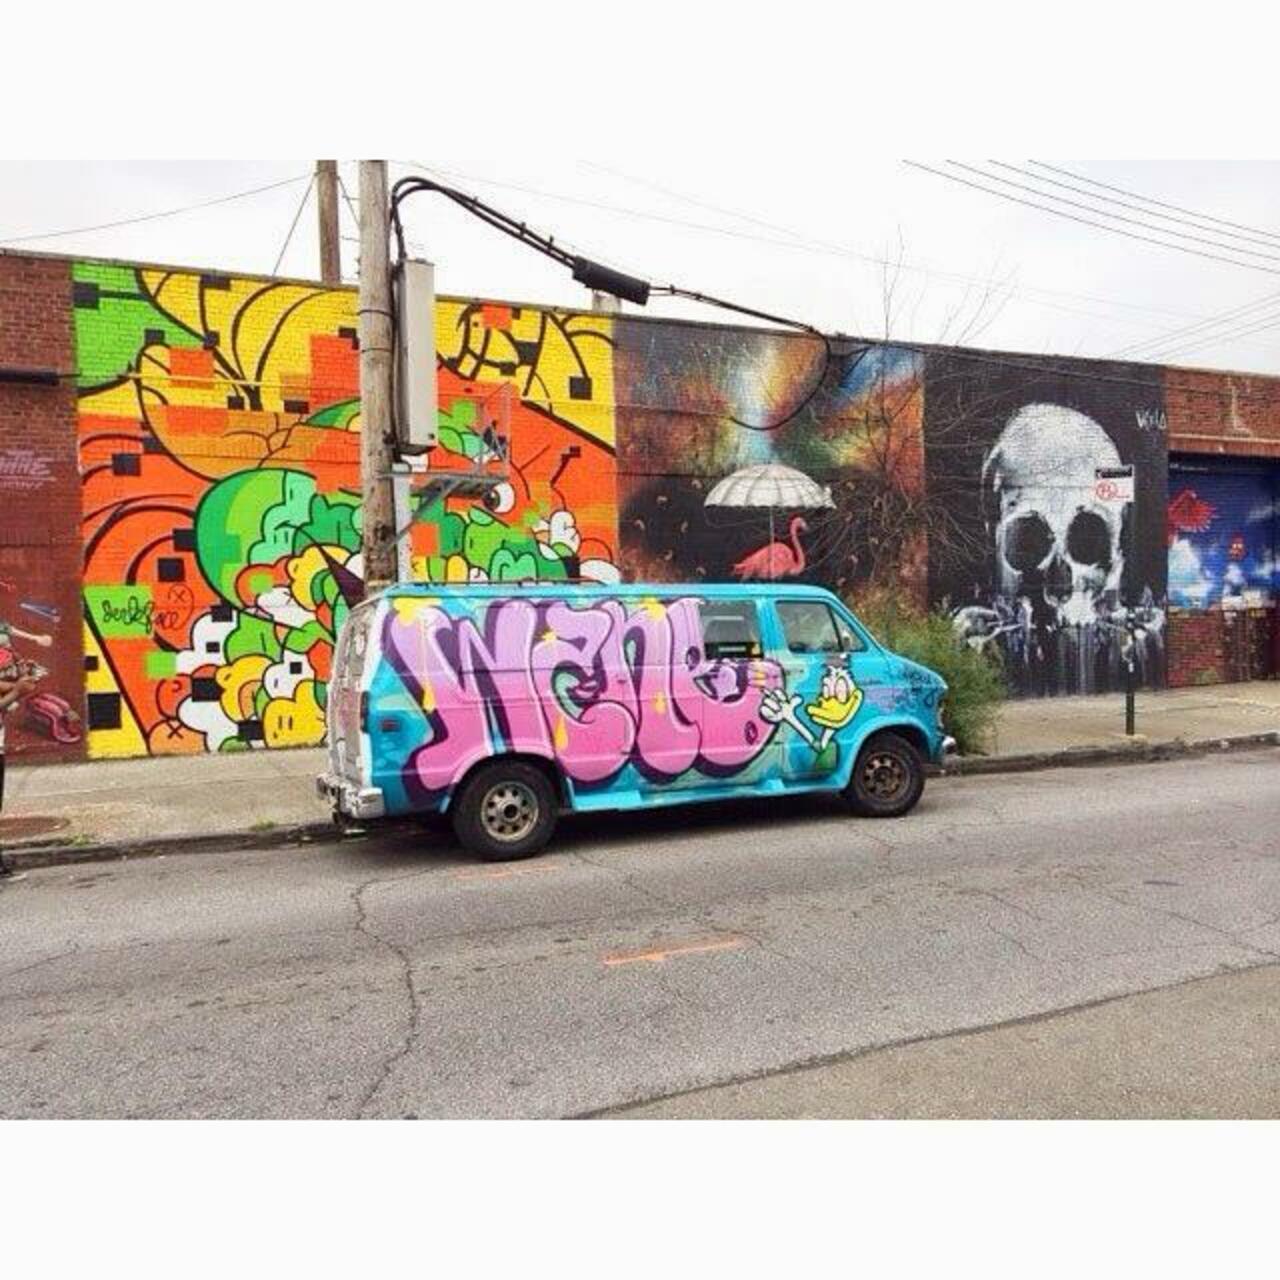 I saw this van in #brooklyn . Does anyone know of the #artist ? #streetart #graffiti http://t.co/NYhDBEQuju